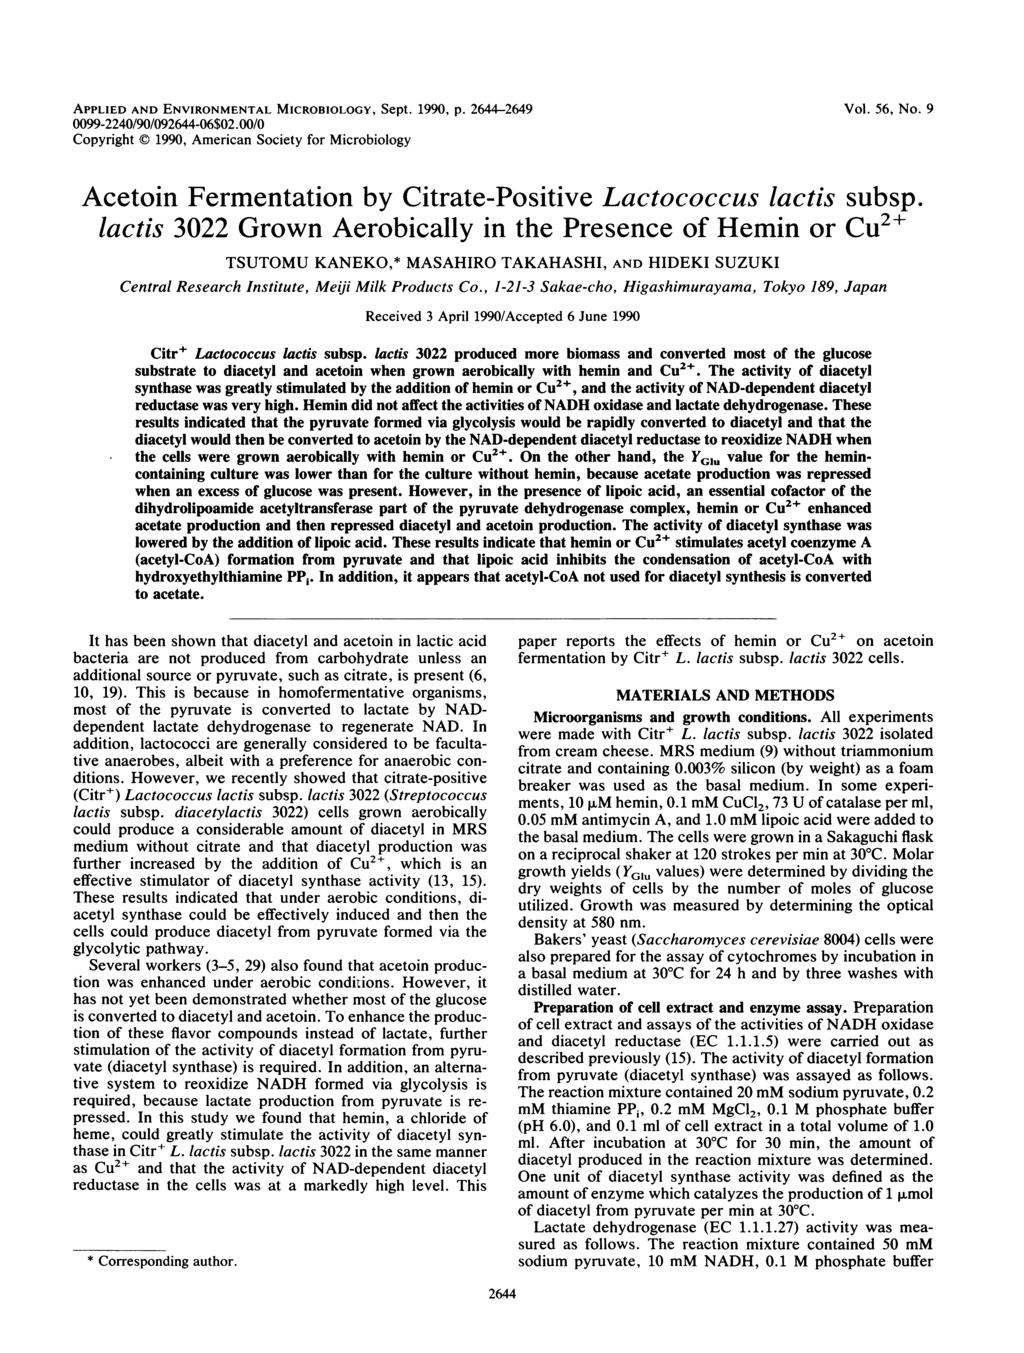 APPLIED AND ENVIRONMENTAL MICROBIOLOGY, Sept. 199, p. 2644-2649 99-224/9/92644-6$2./ Copyright C) 199, American Society for Microbiology Vol. 56, No.